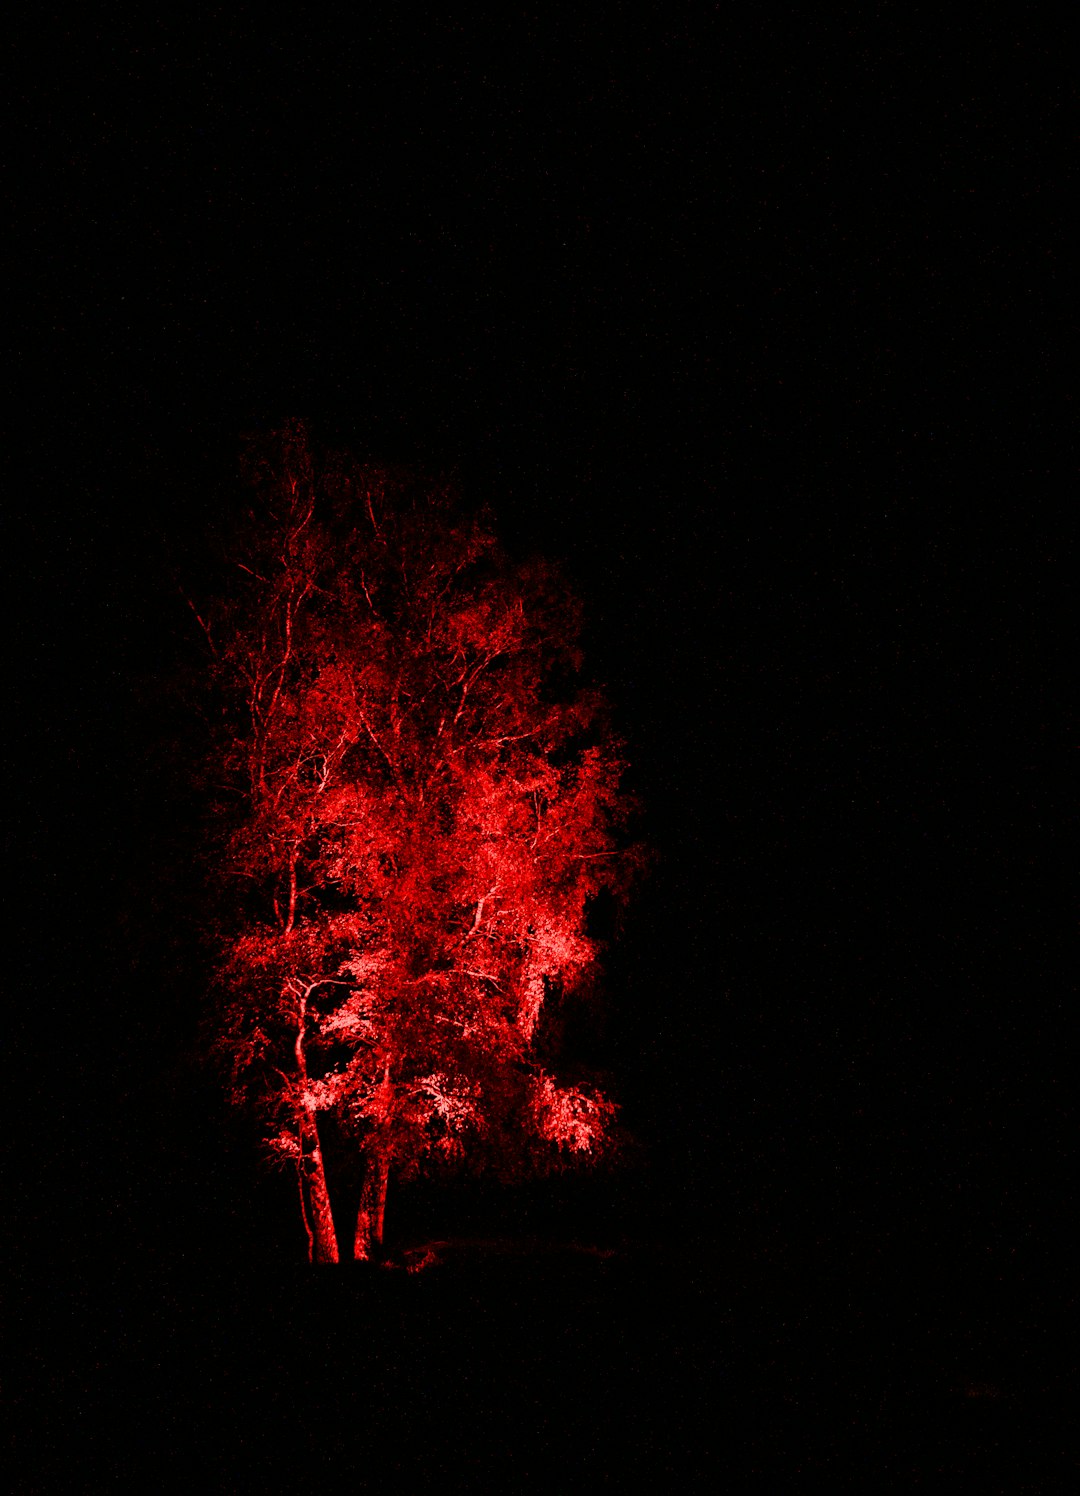 red and black fire during night time